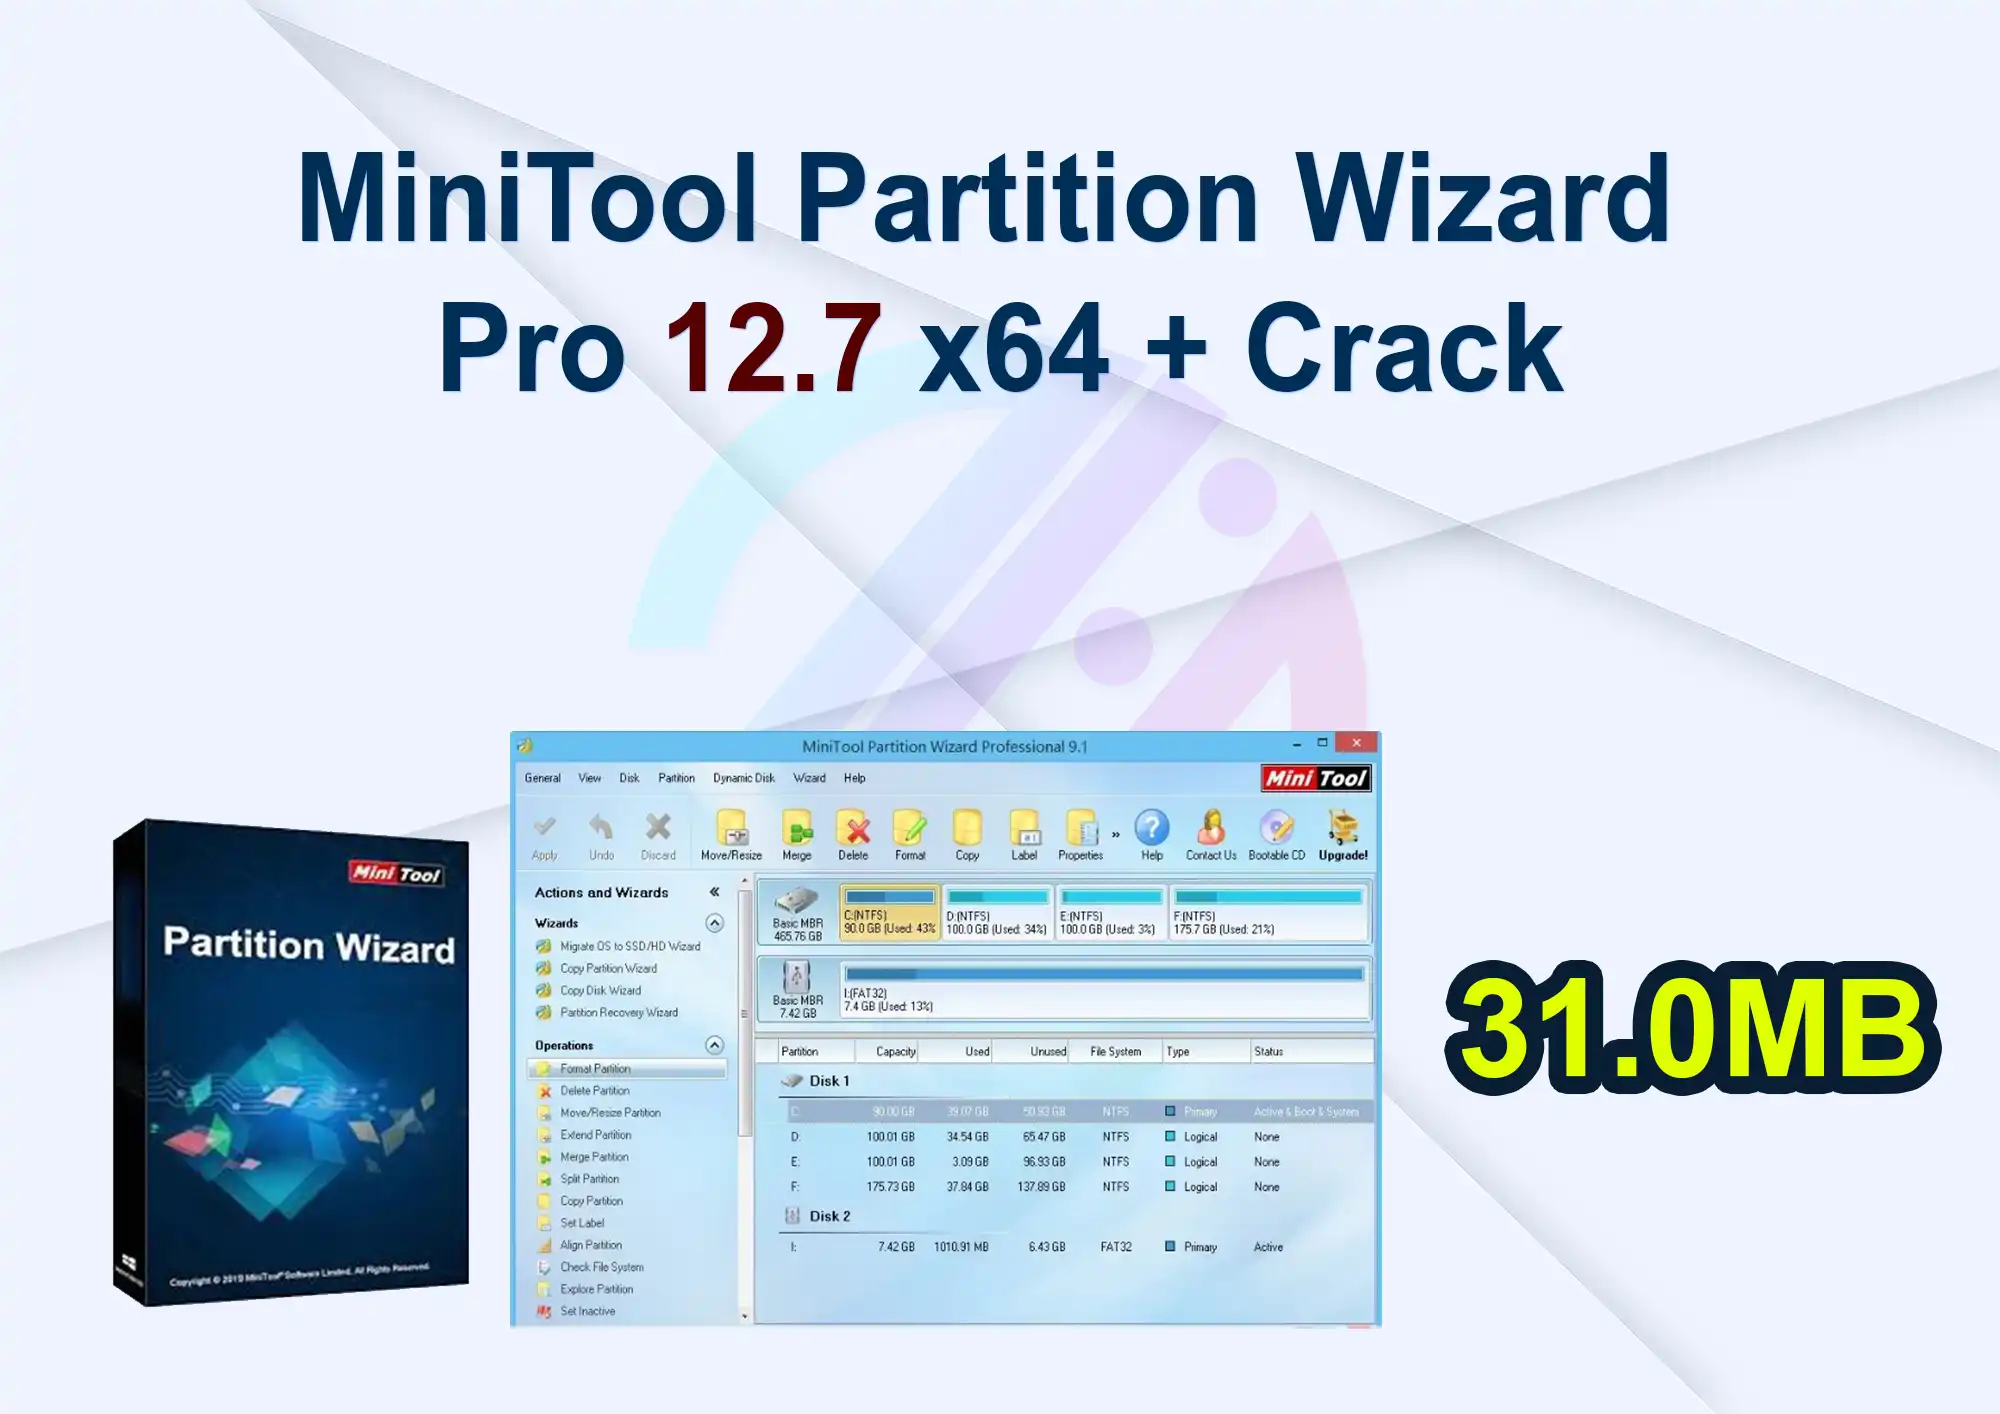 MiniTool Partition Wizard Pro 12.7 x64 + Crack